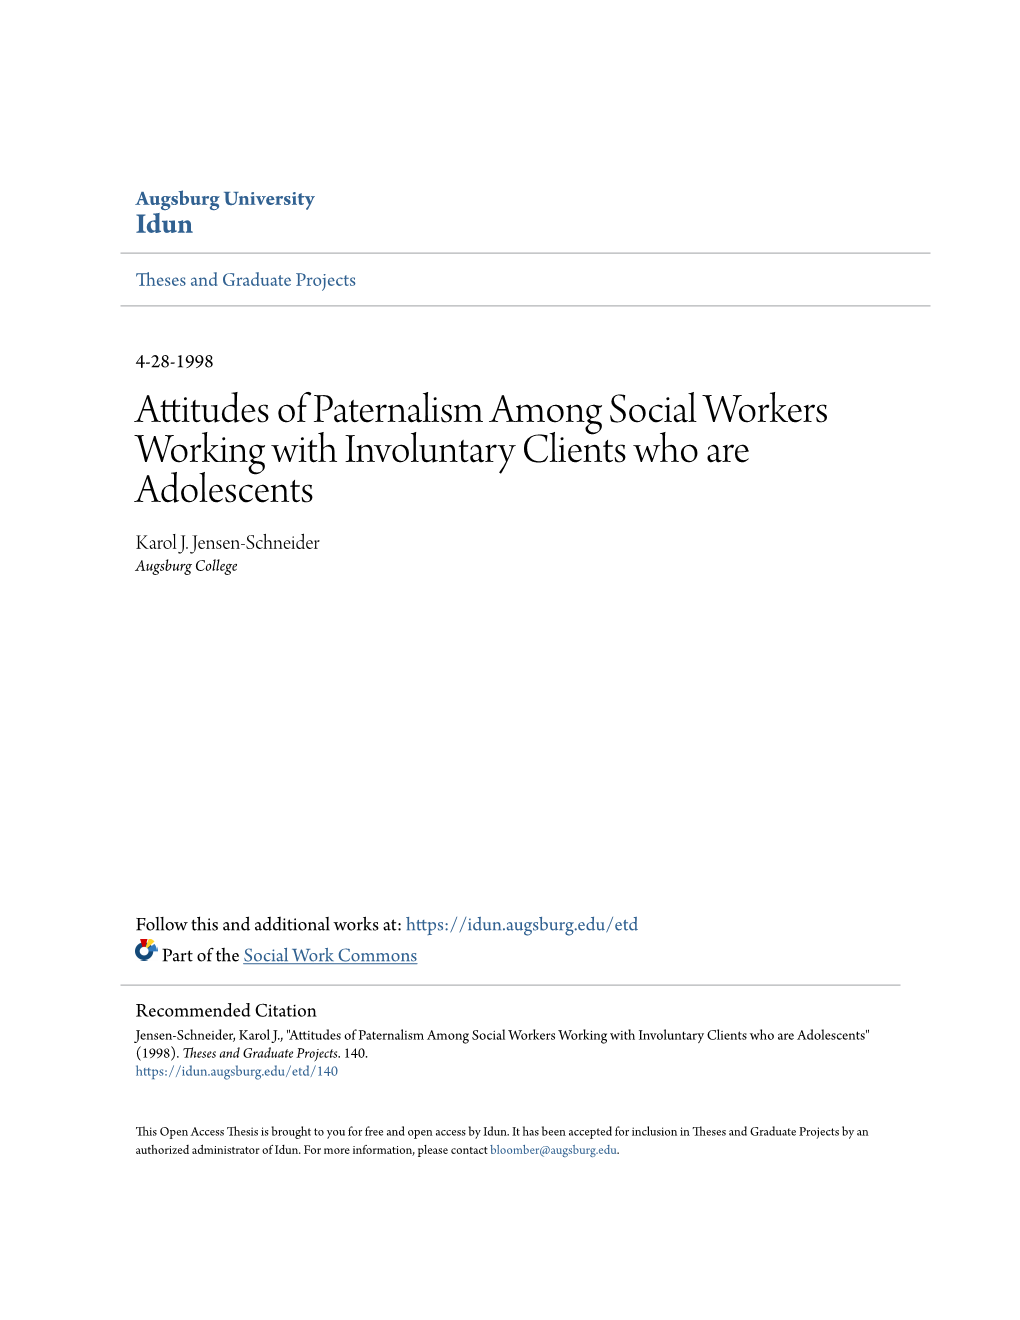 Attitudes of Paternalism Among Social Workers Working with Involuntary Clients Who Are Adolescents Karol J